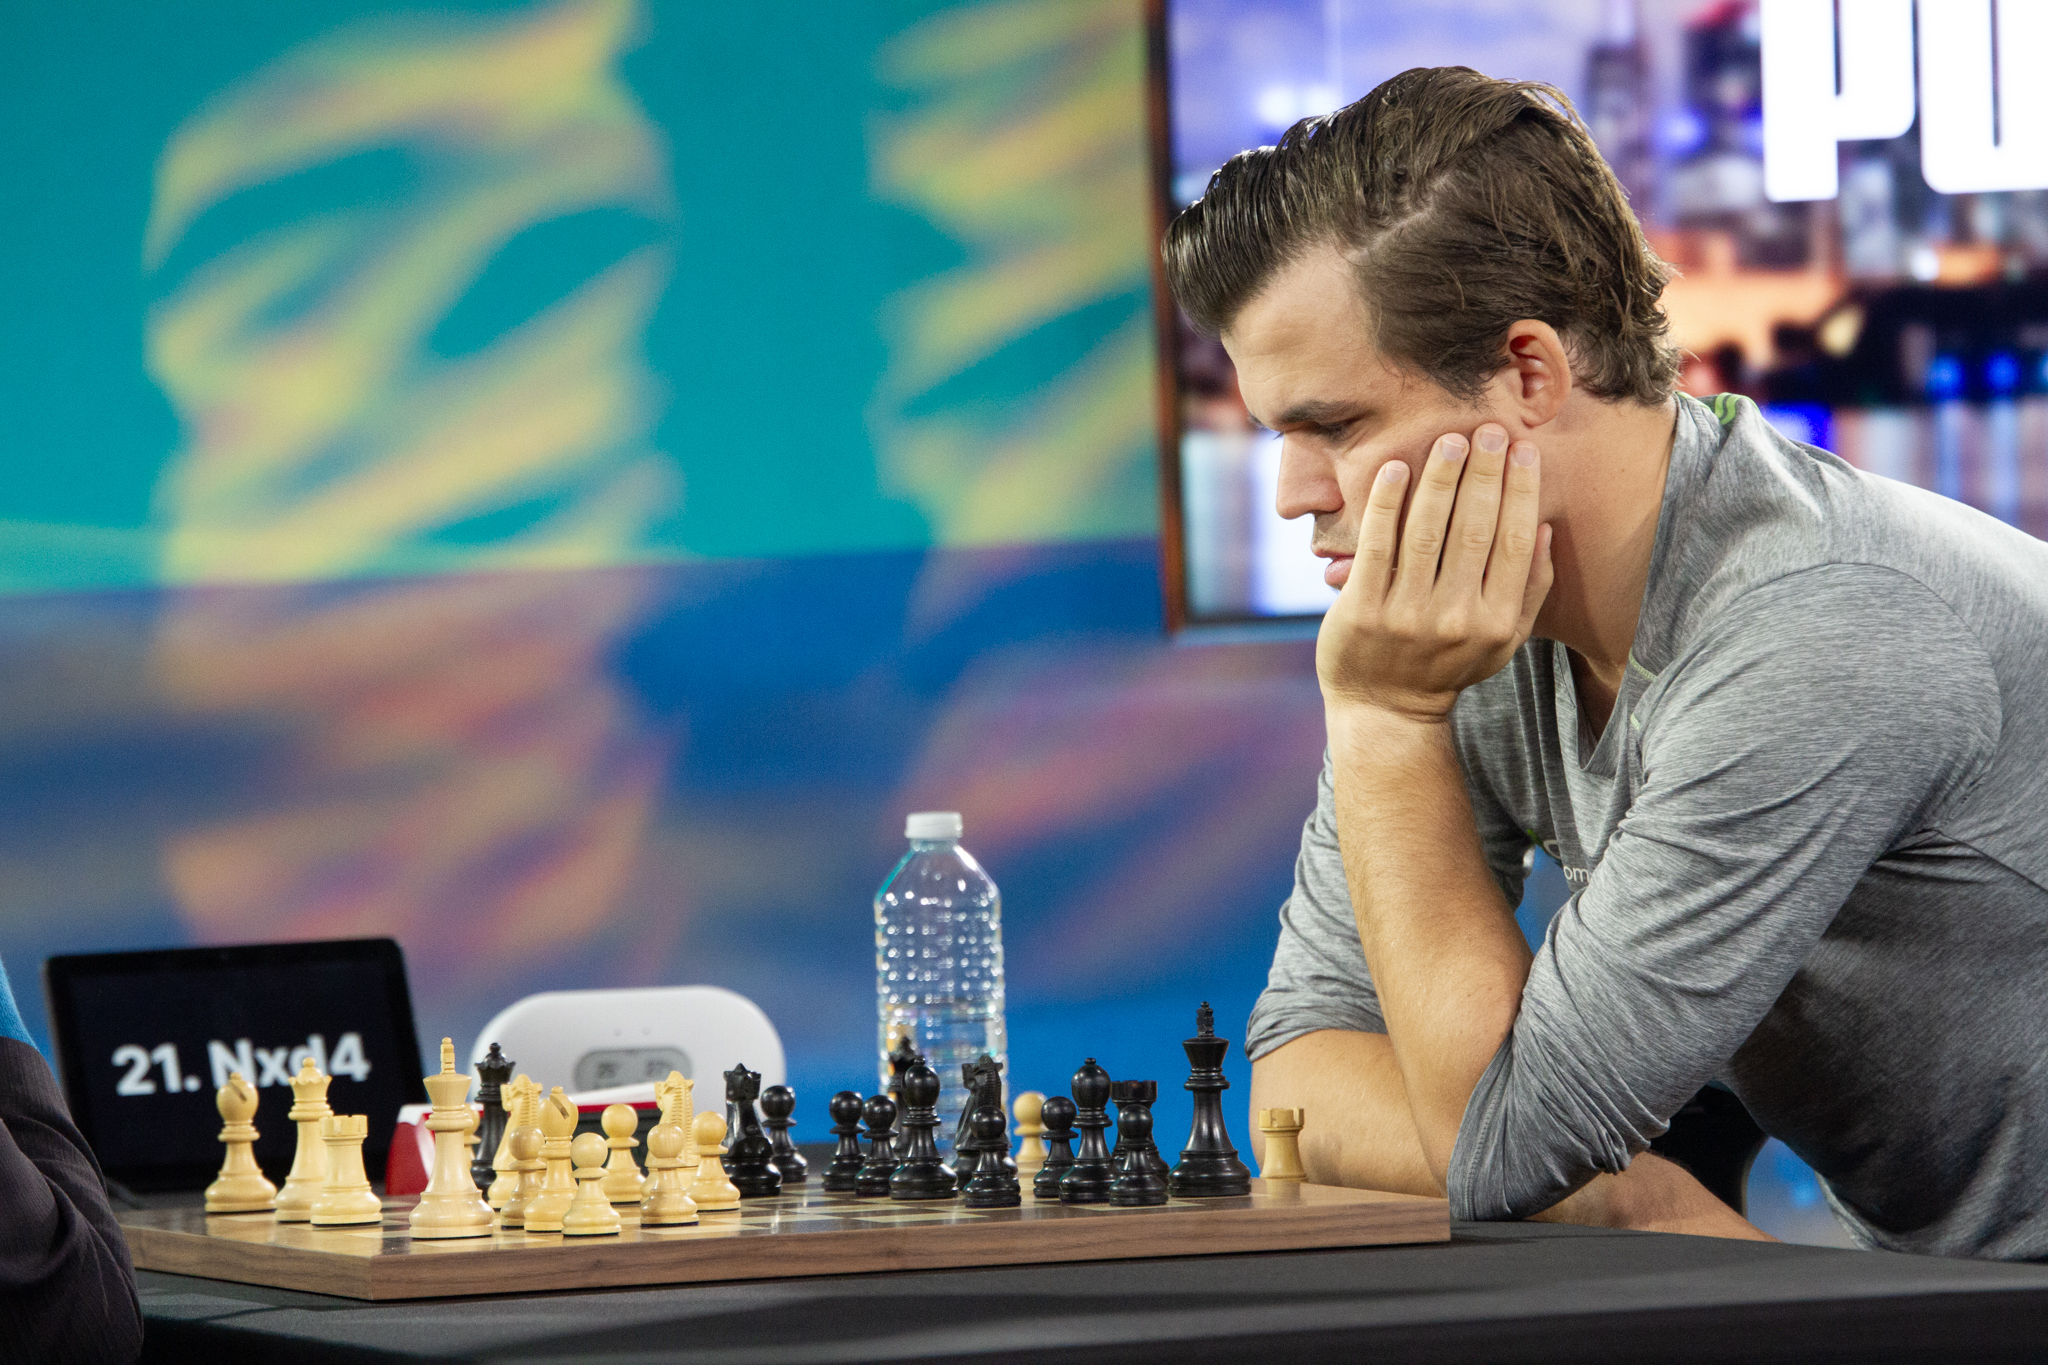 The Champions Chess Tour is back: All you need to know